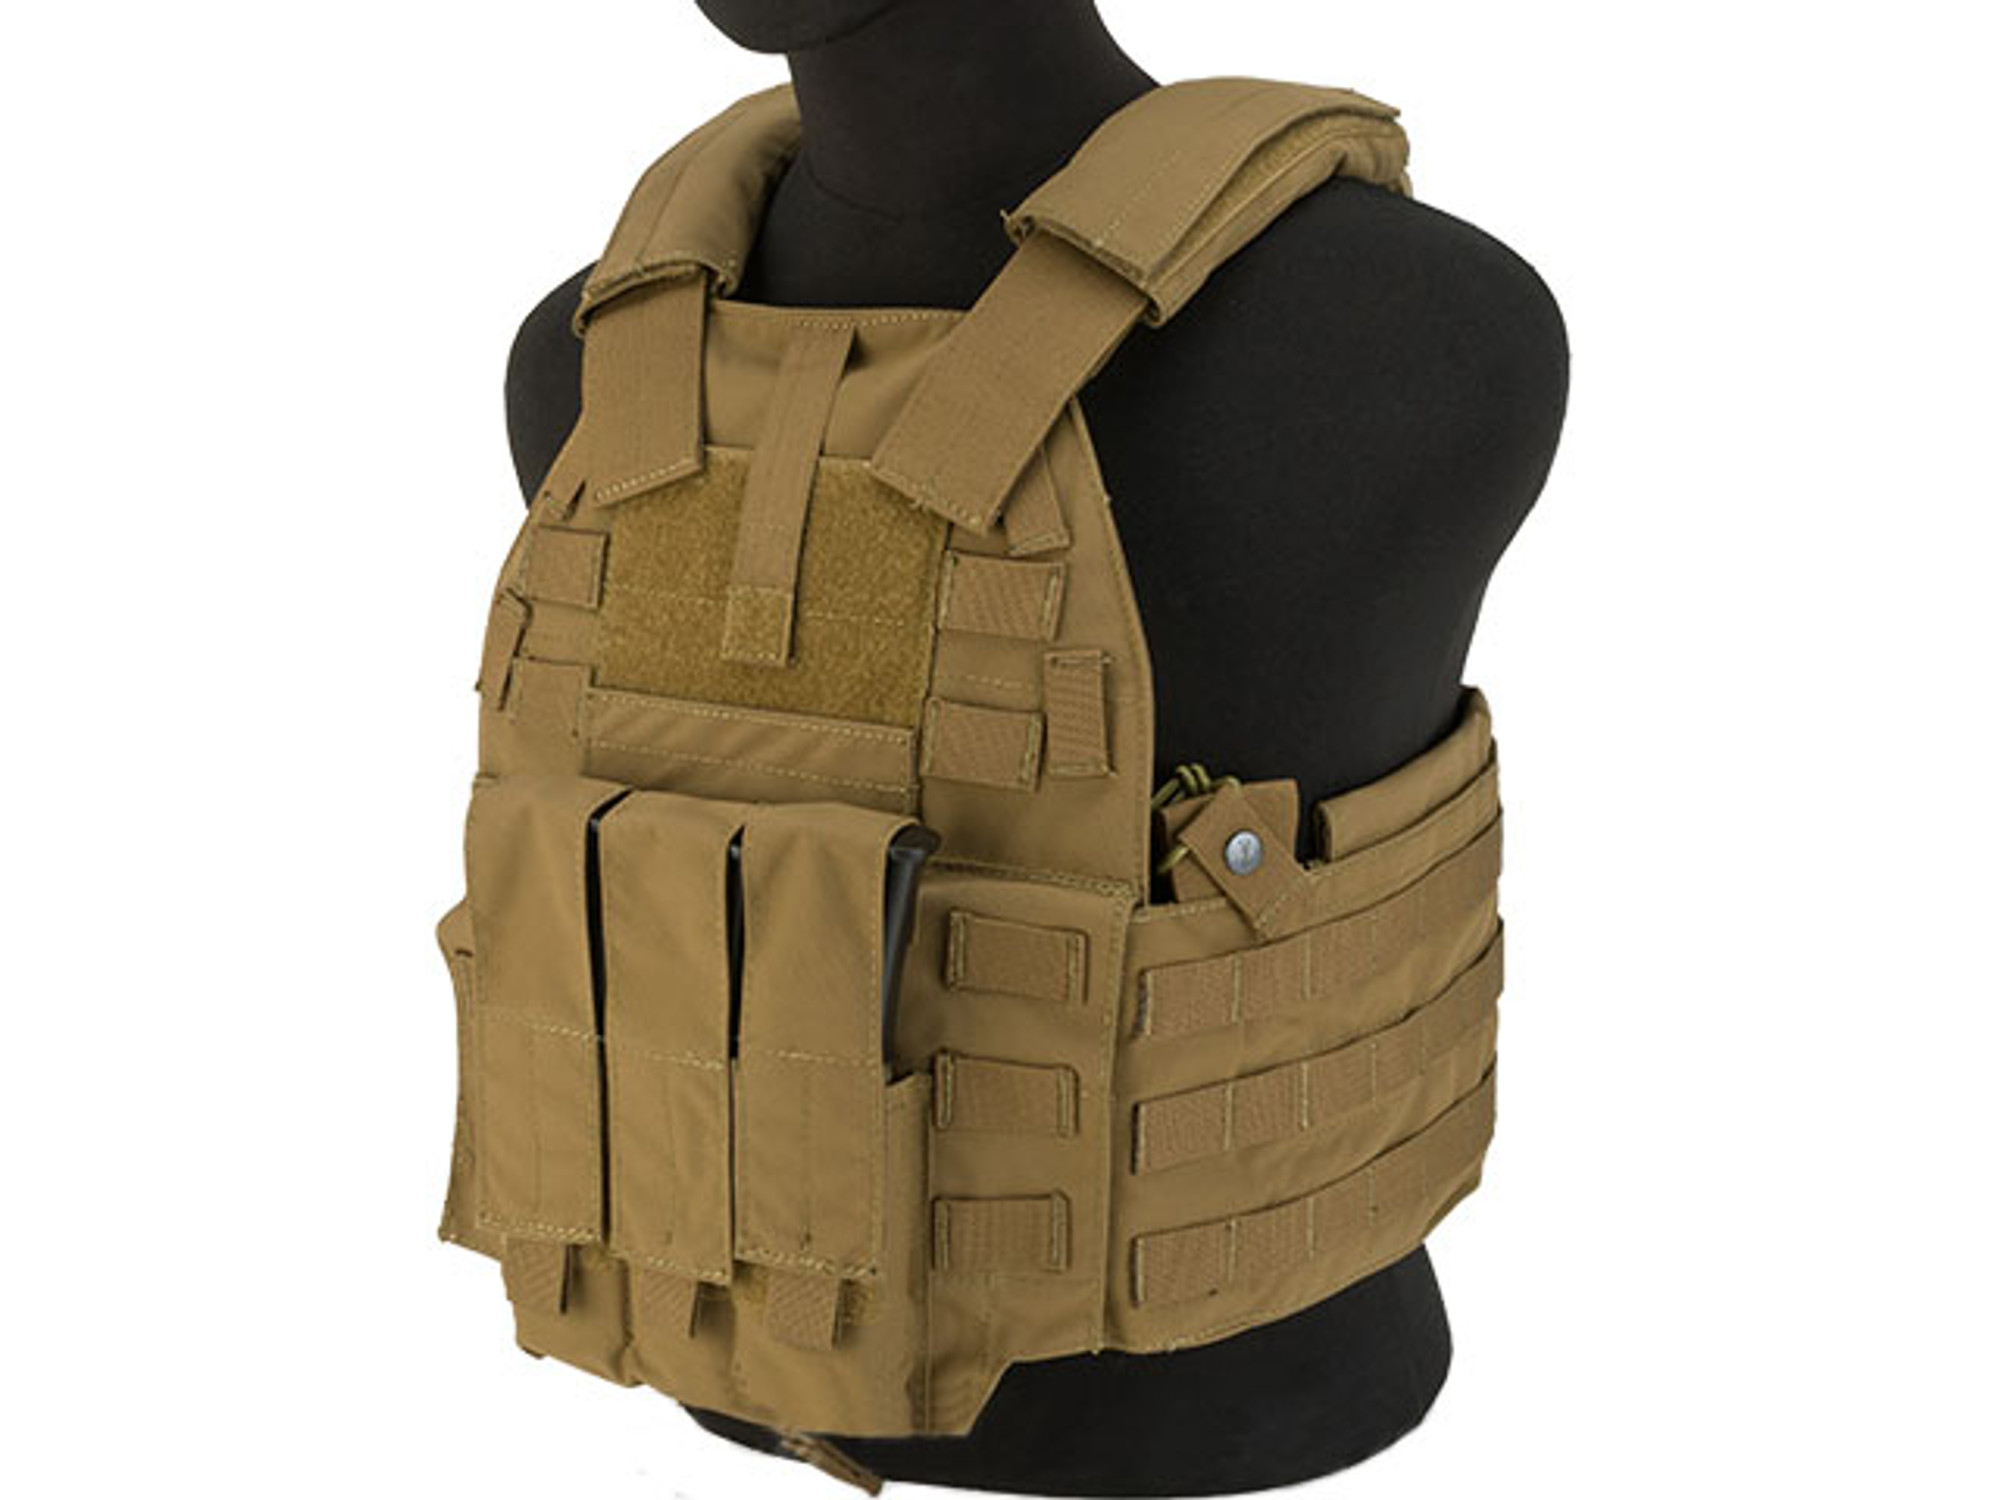 TMC 94K-MP7 Plate Carrier - Coyote Brown